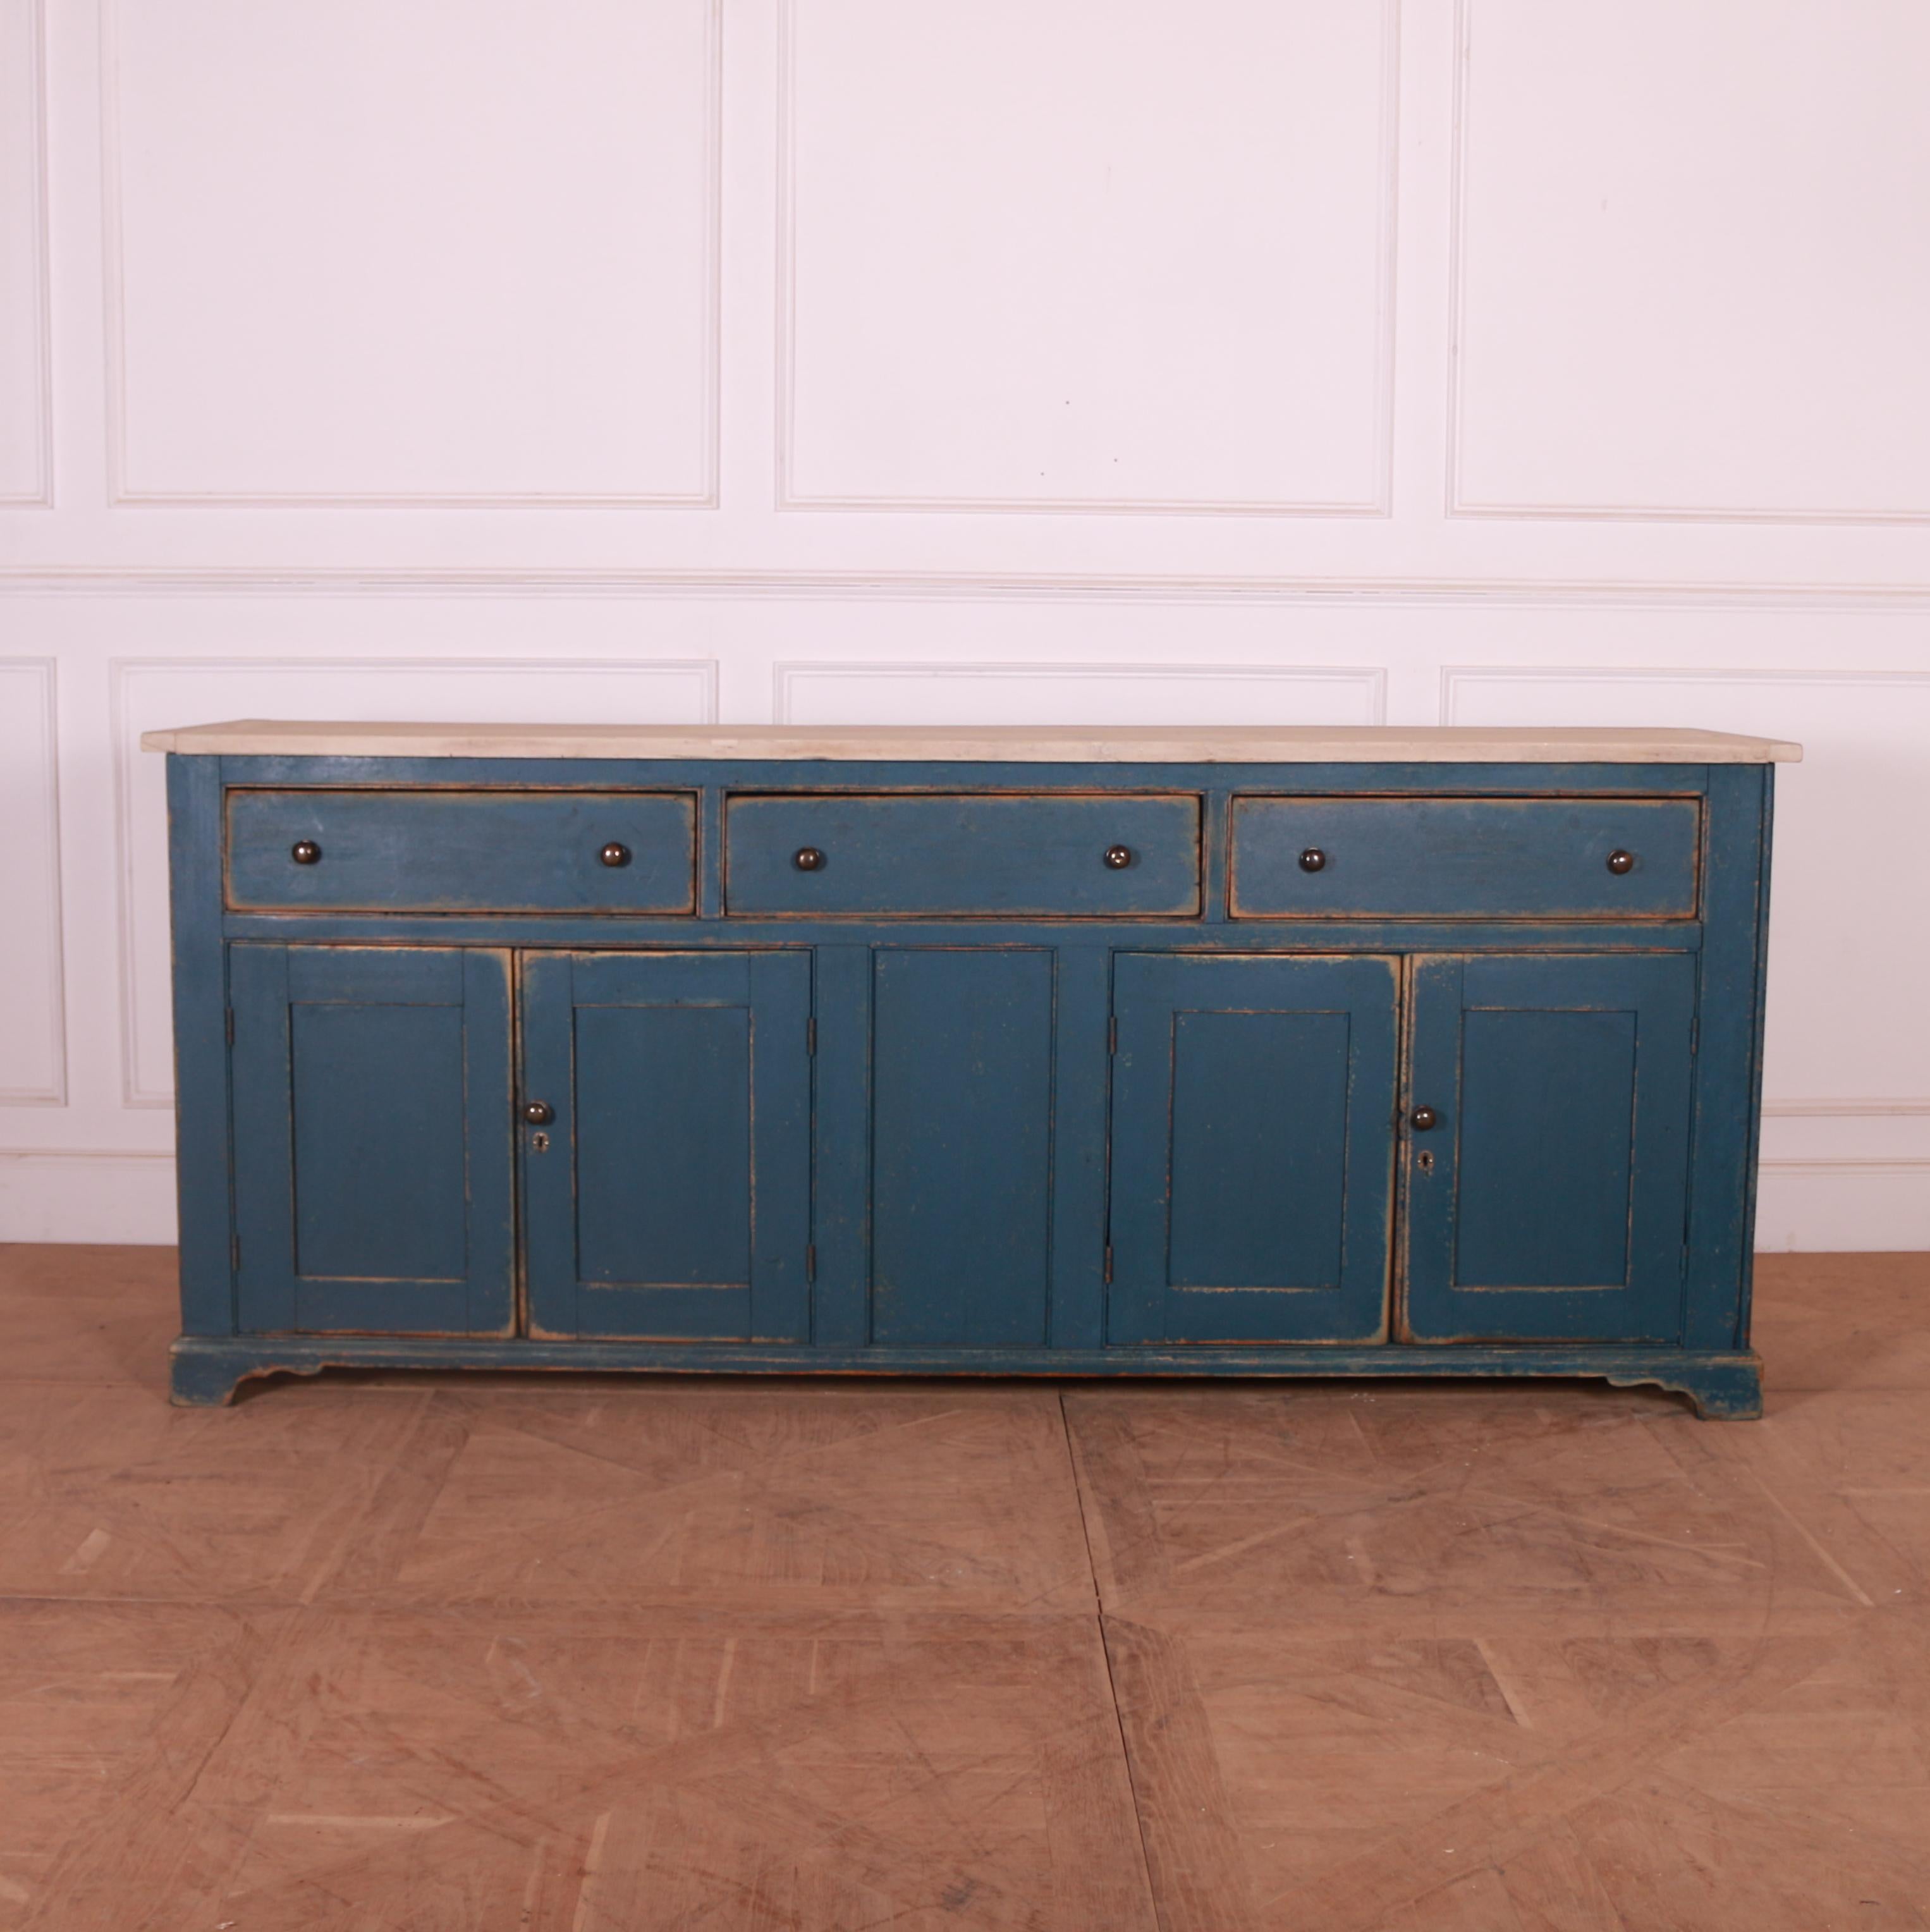 Good early 19th century painted pine English country house dresser base, 1820.



Dimensions
91 inches (231 cms) wide
22.5 inches (57 cms) deep
38 inches (97 cms) high.